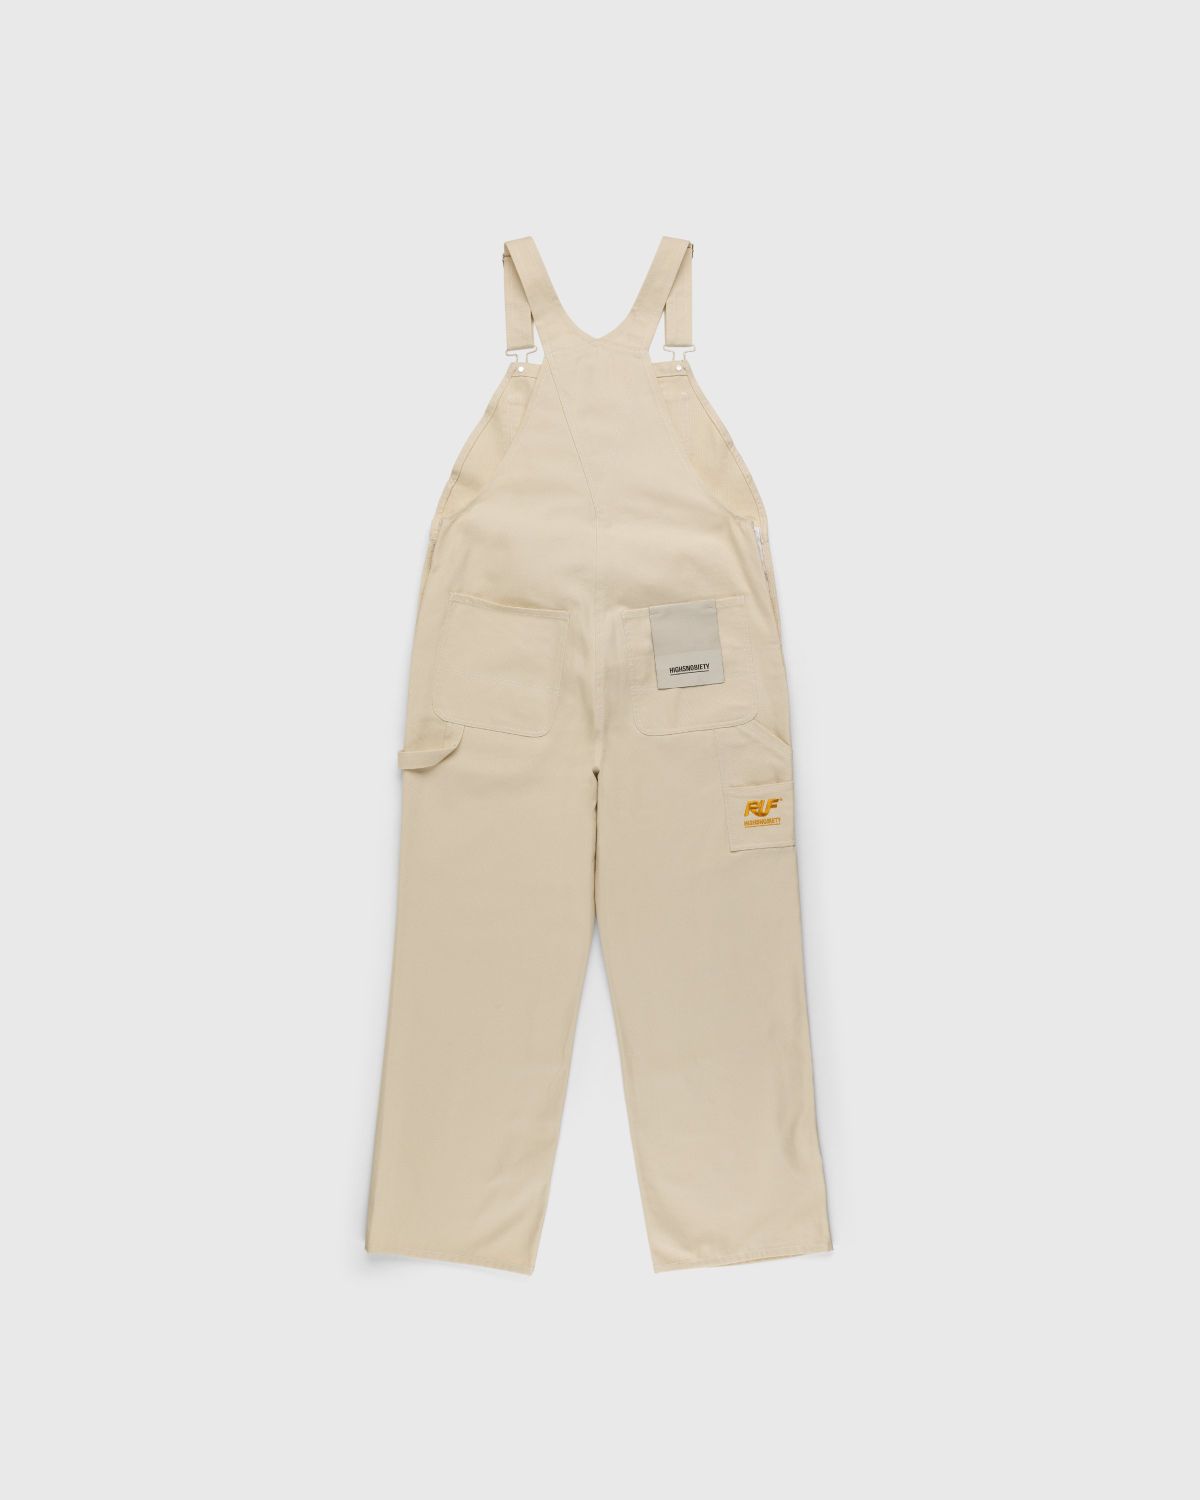 RUF x Highsnobiety – Cotton Overalls Natural - Trousers - Beige - Image 1